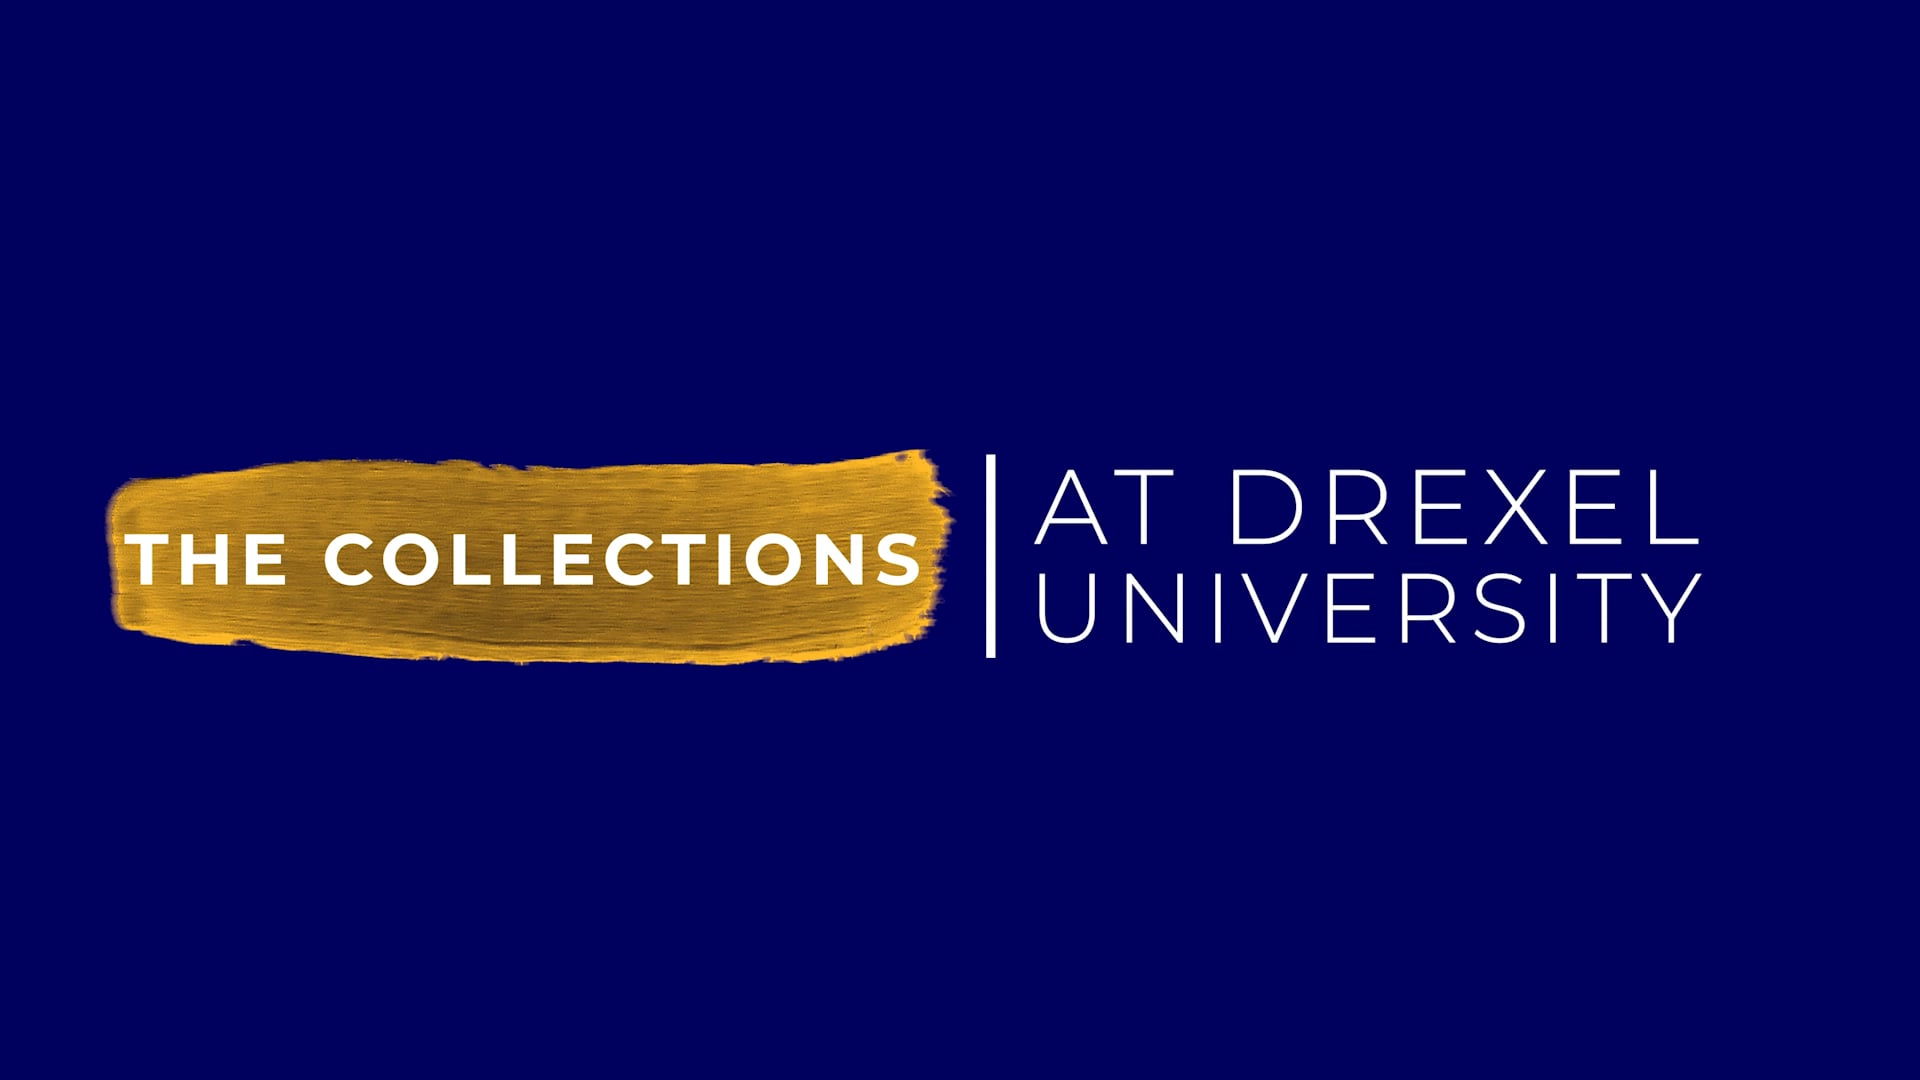 GATEWAY TO THE UNIVERSITY: THE COLLECTIONS AT DREXEL